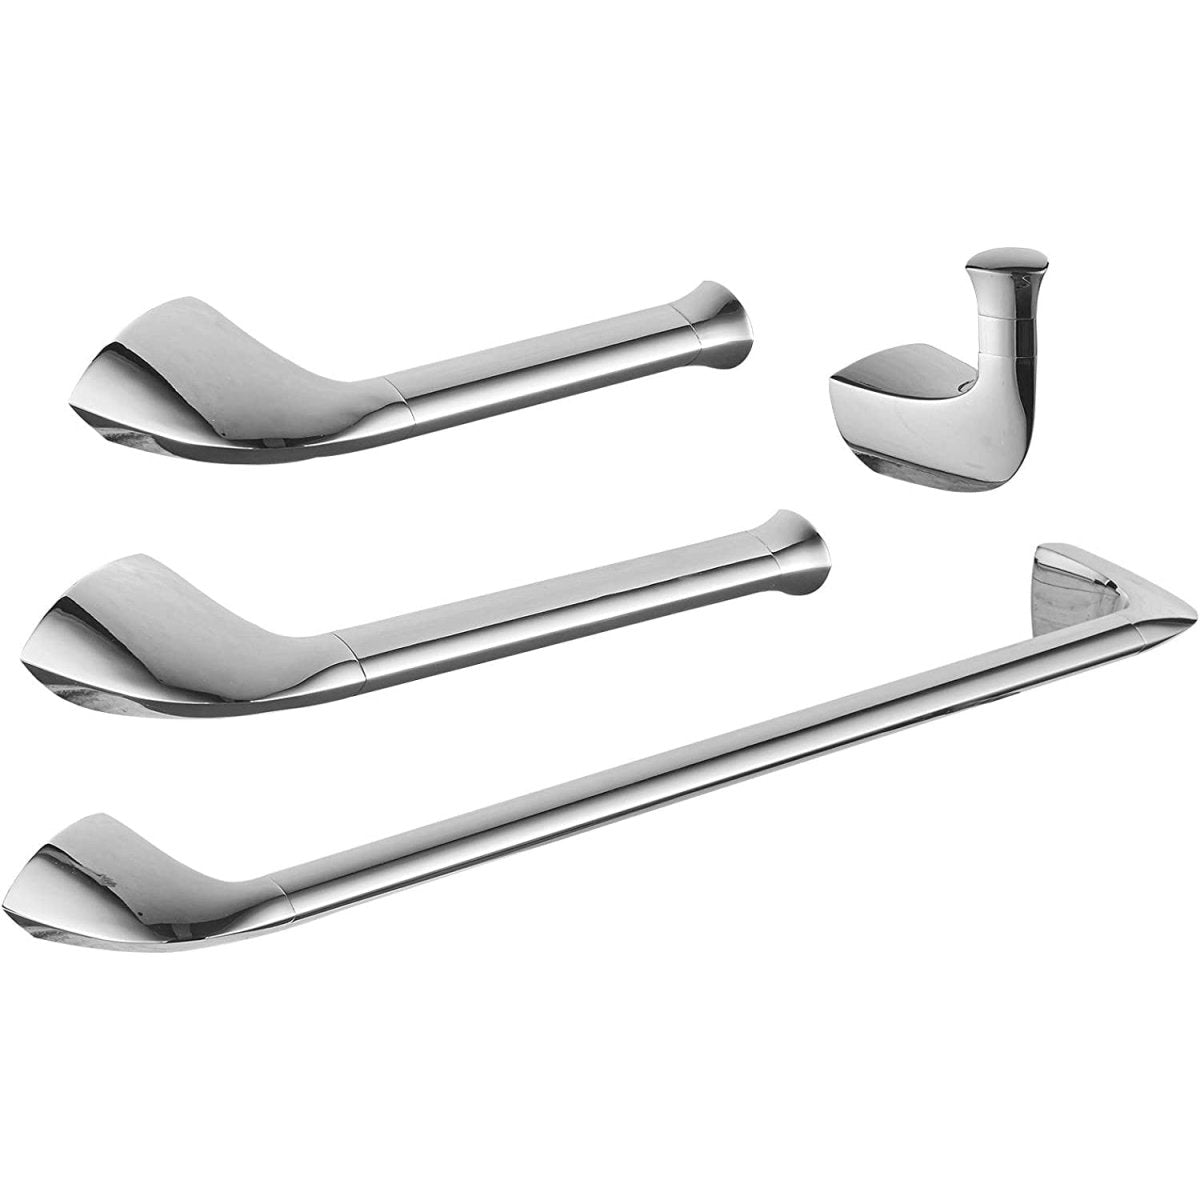 4 PCS Bath Hardware Set Stainless Steel Wall Mounted Chrome - buyfaucet.com